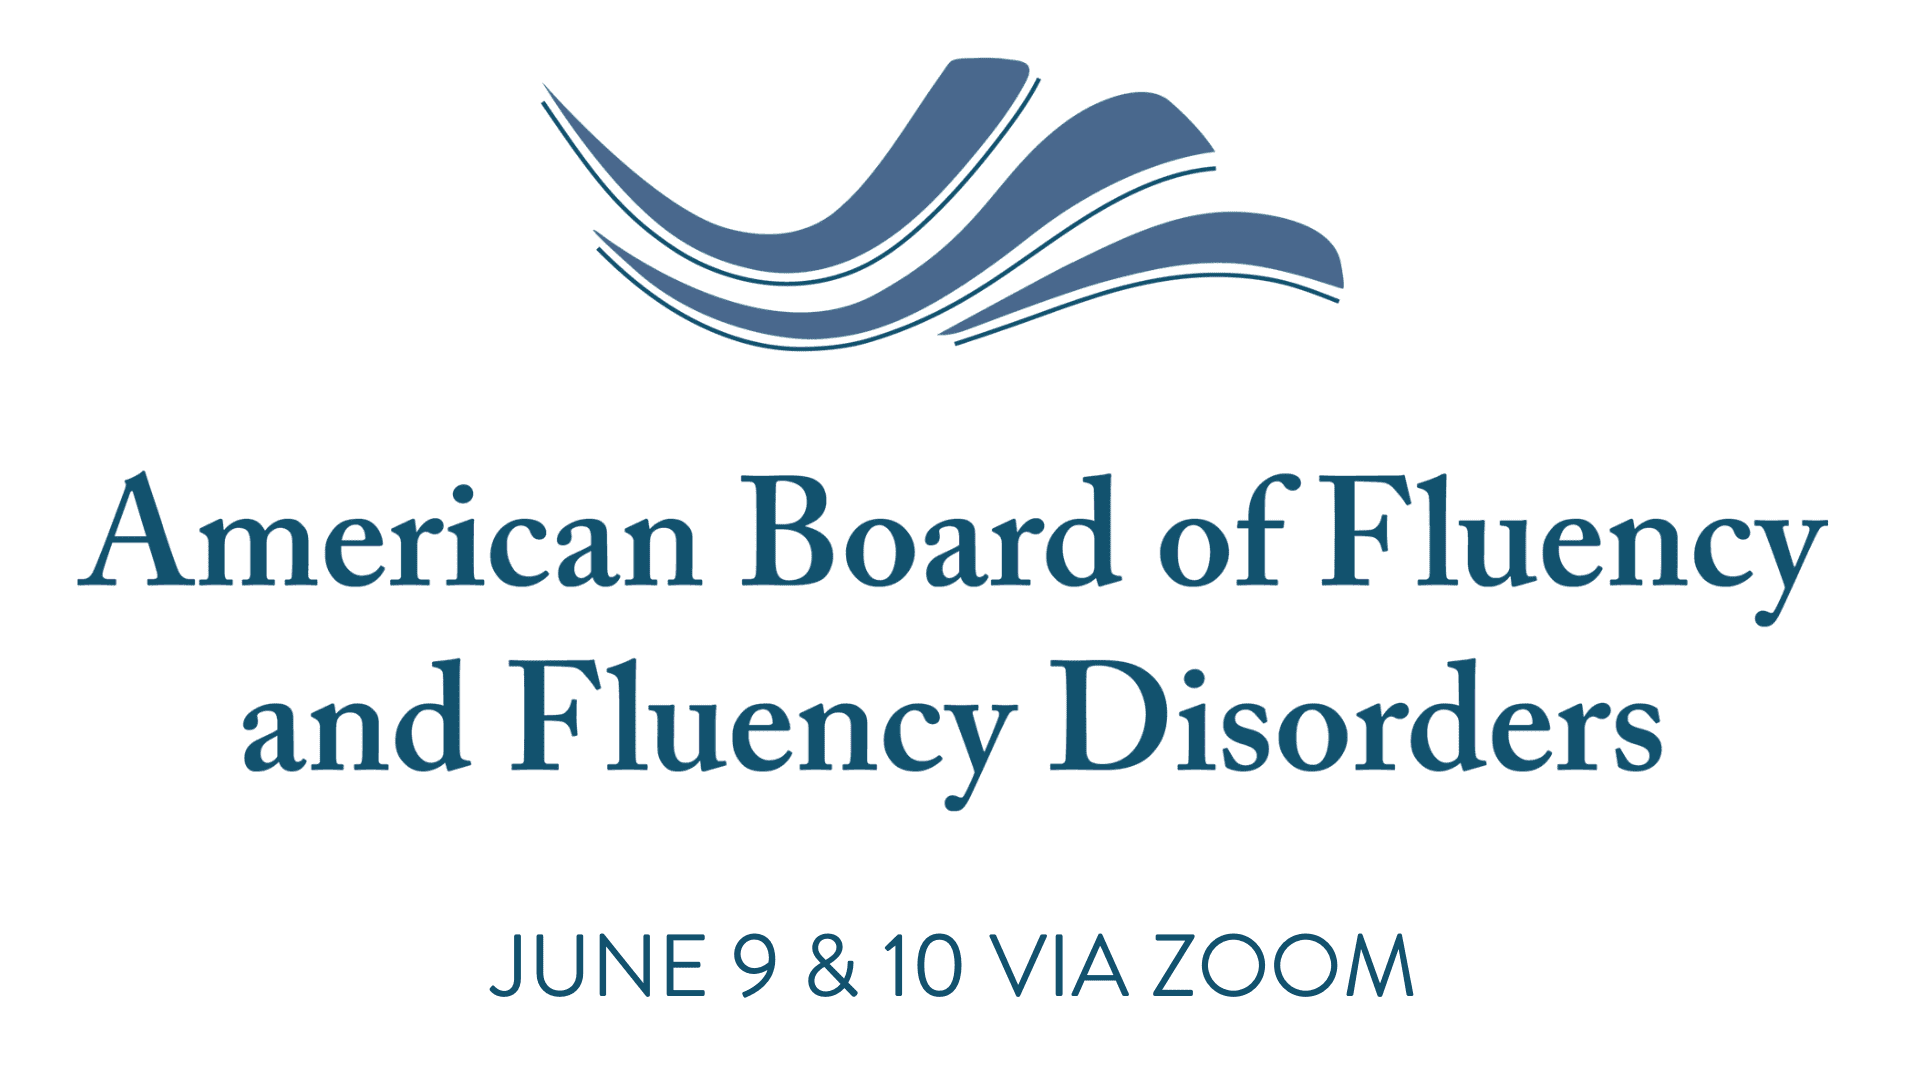 Logo of the american board of fluency and fluency disorders with a stylized wave above the text, including event dates "june 9 & 10 via zoom" in blue font.